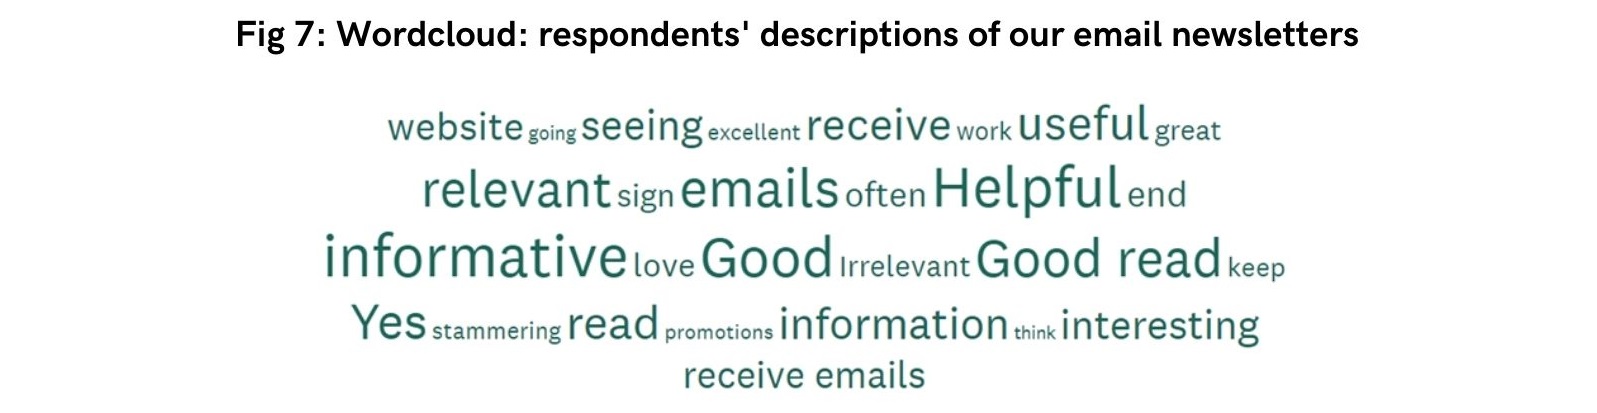 A word cloud showing popular descriptions of STAMMA newsletters from respondents